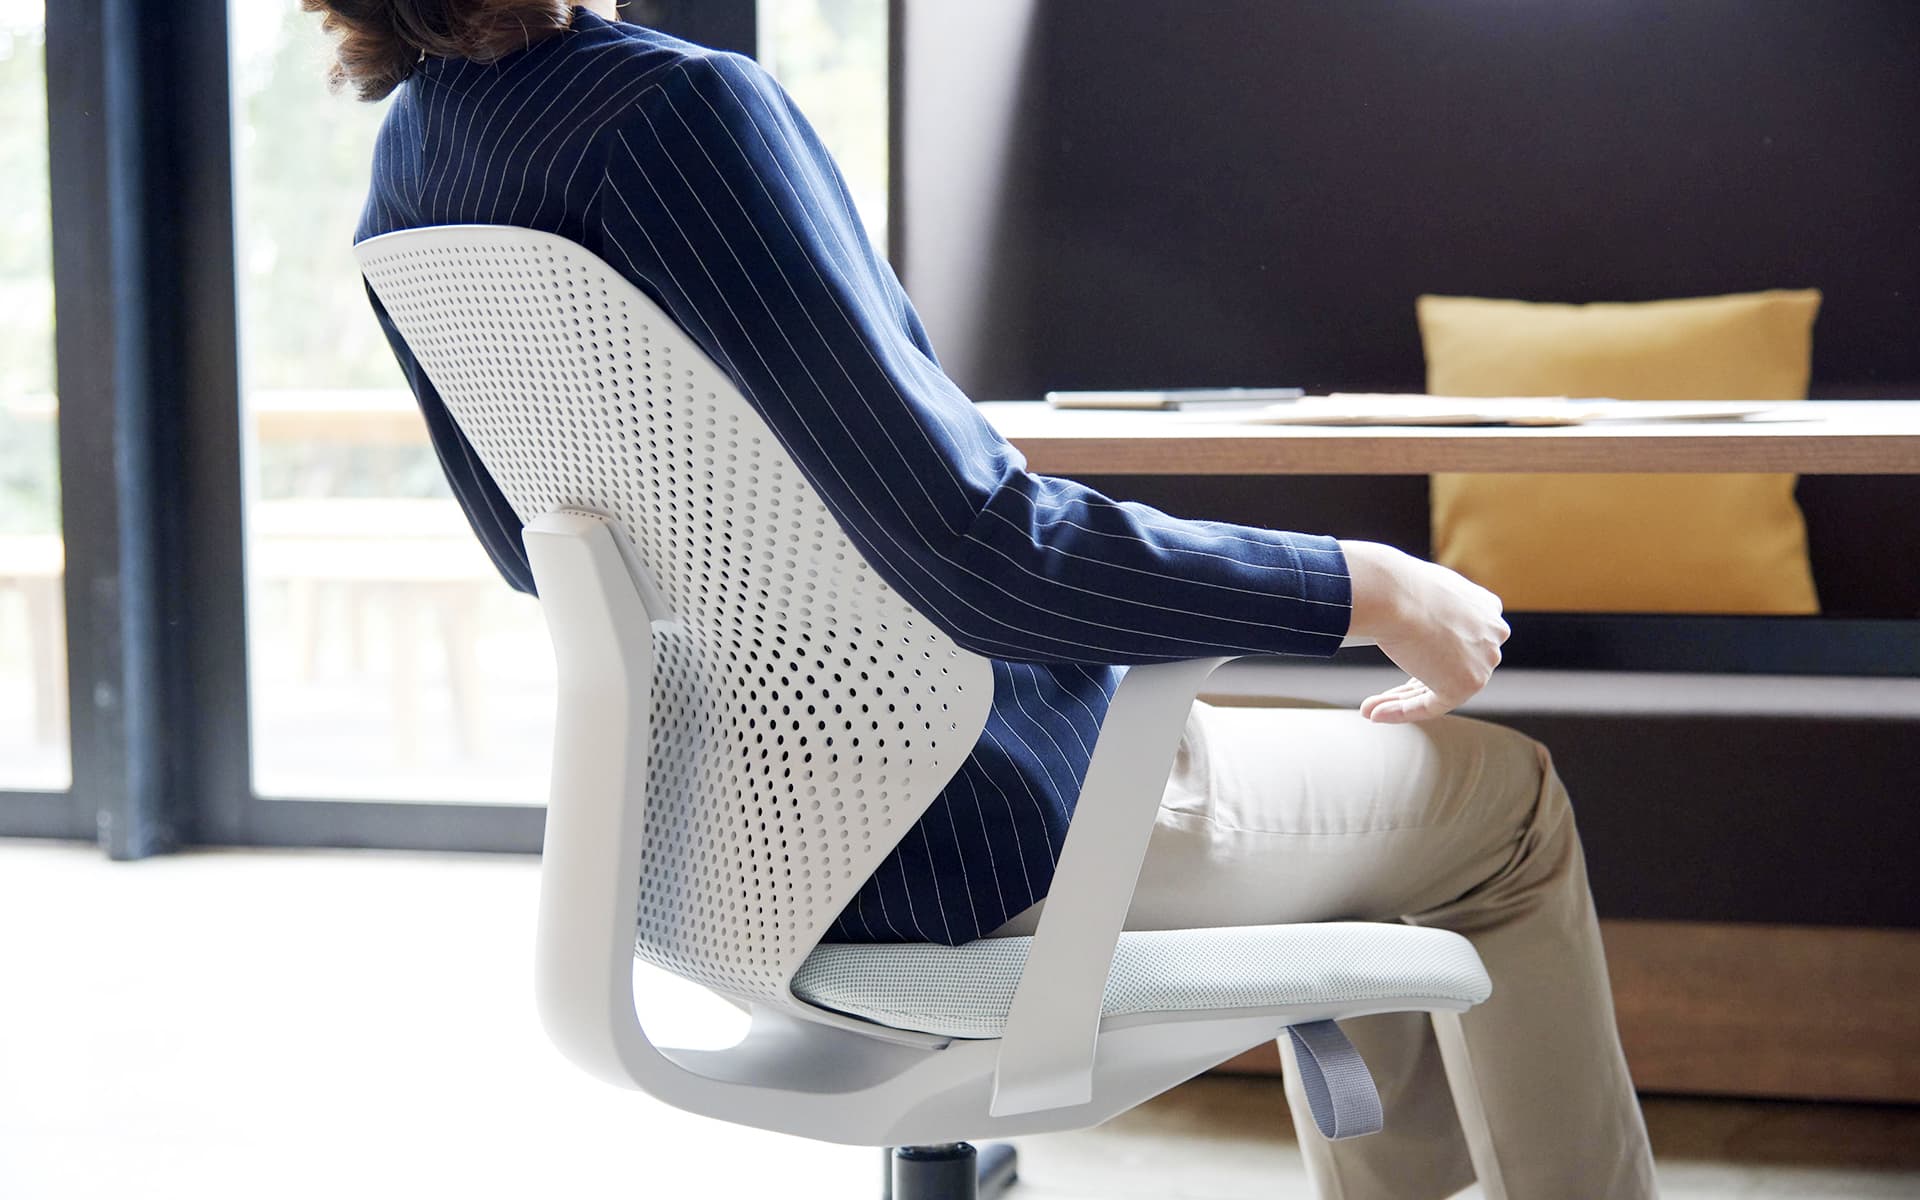 An elegantly dressed woman sits in a white ITOKI QuA office chair by ITO Design